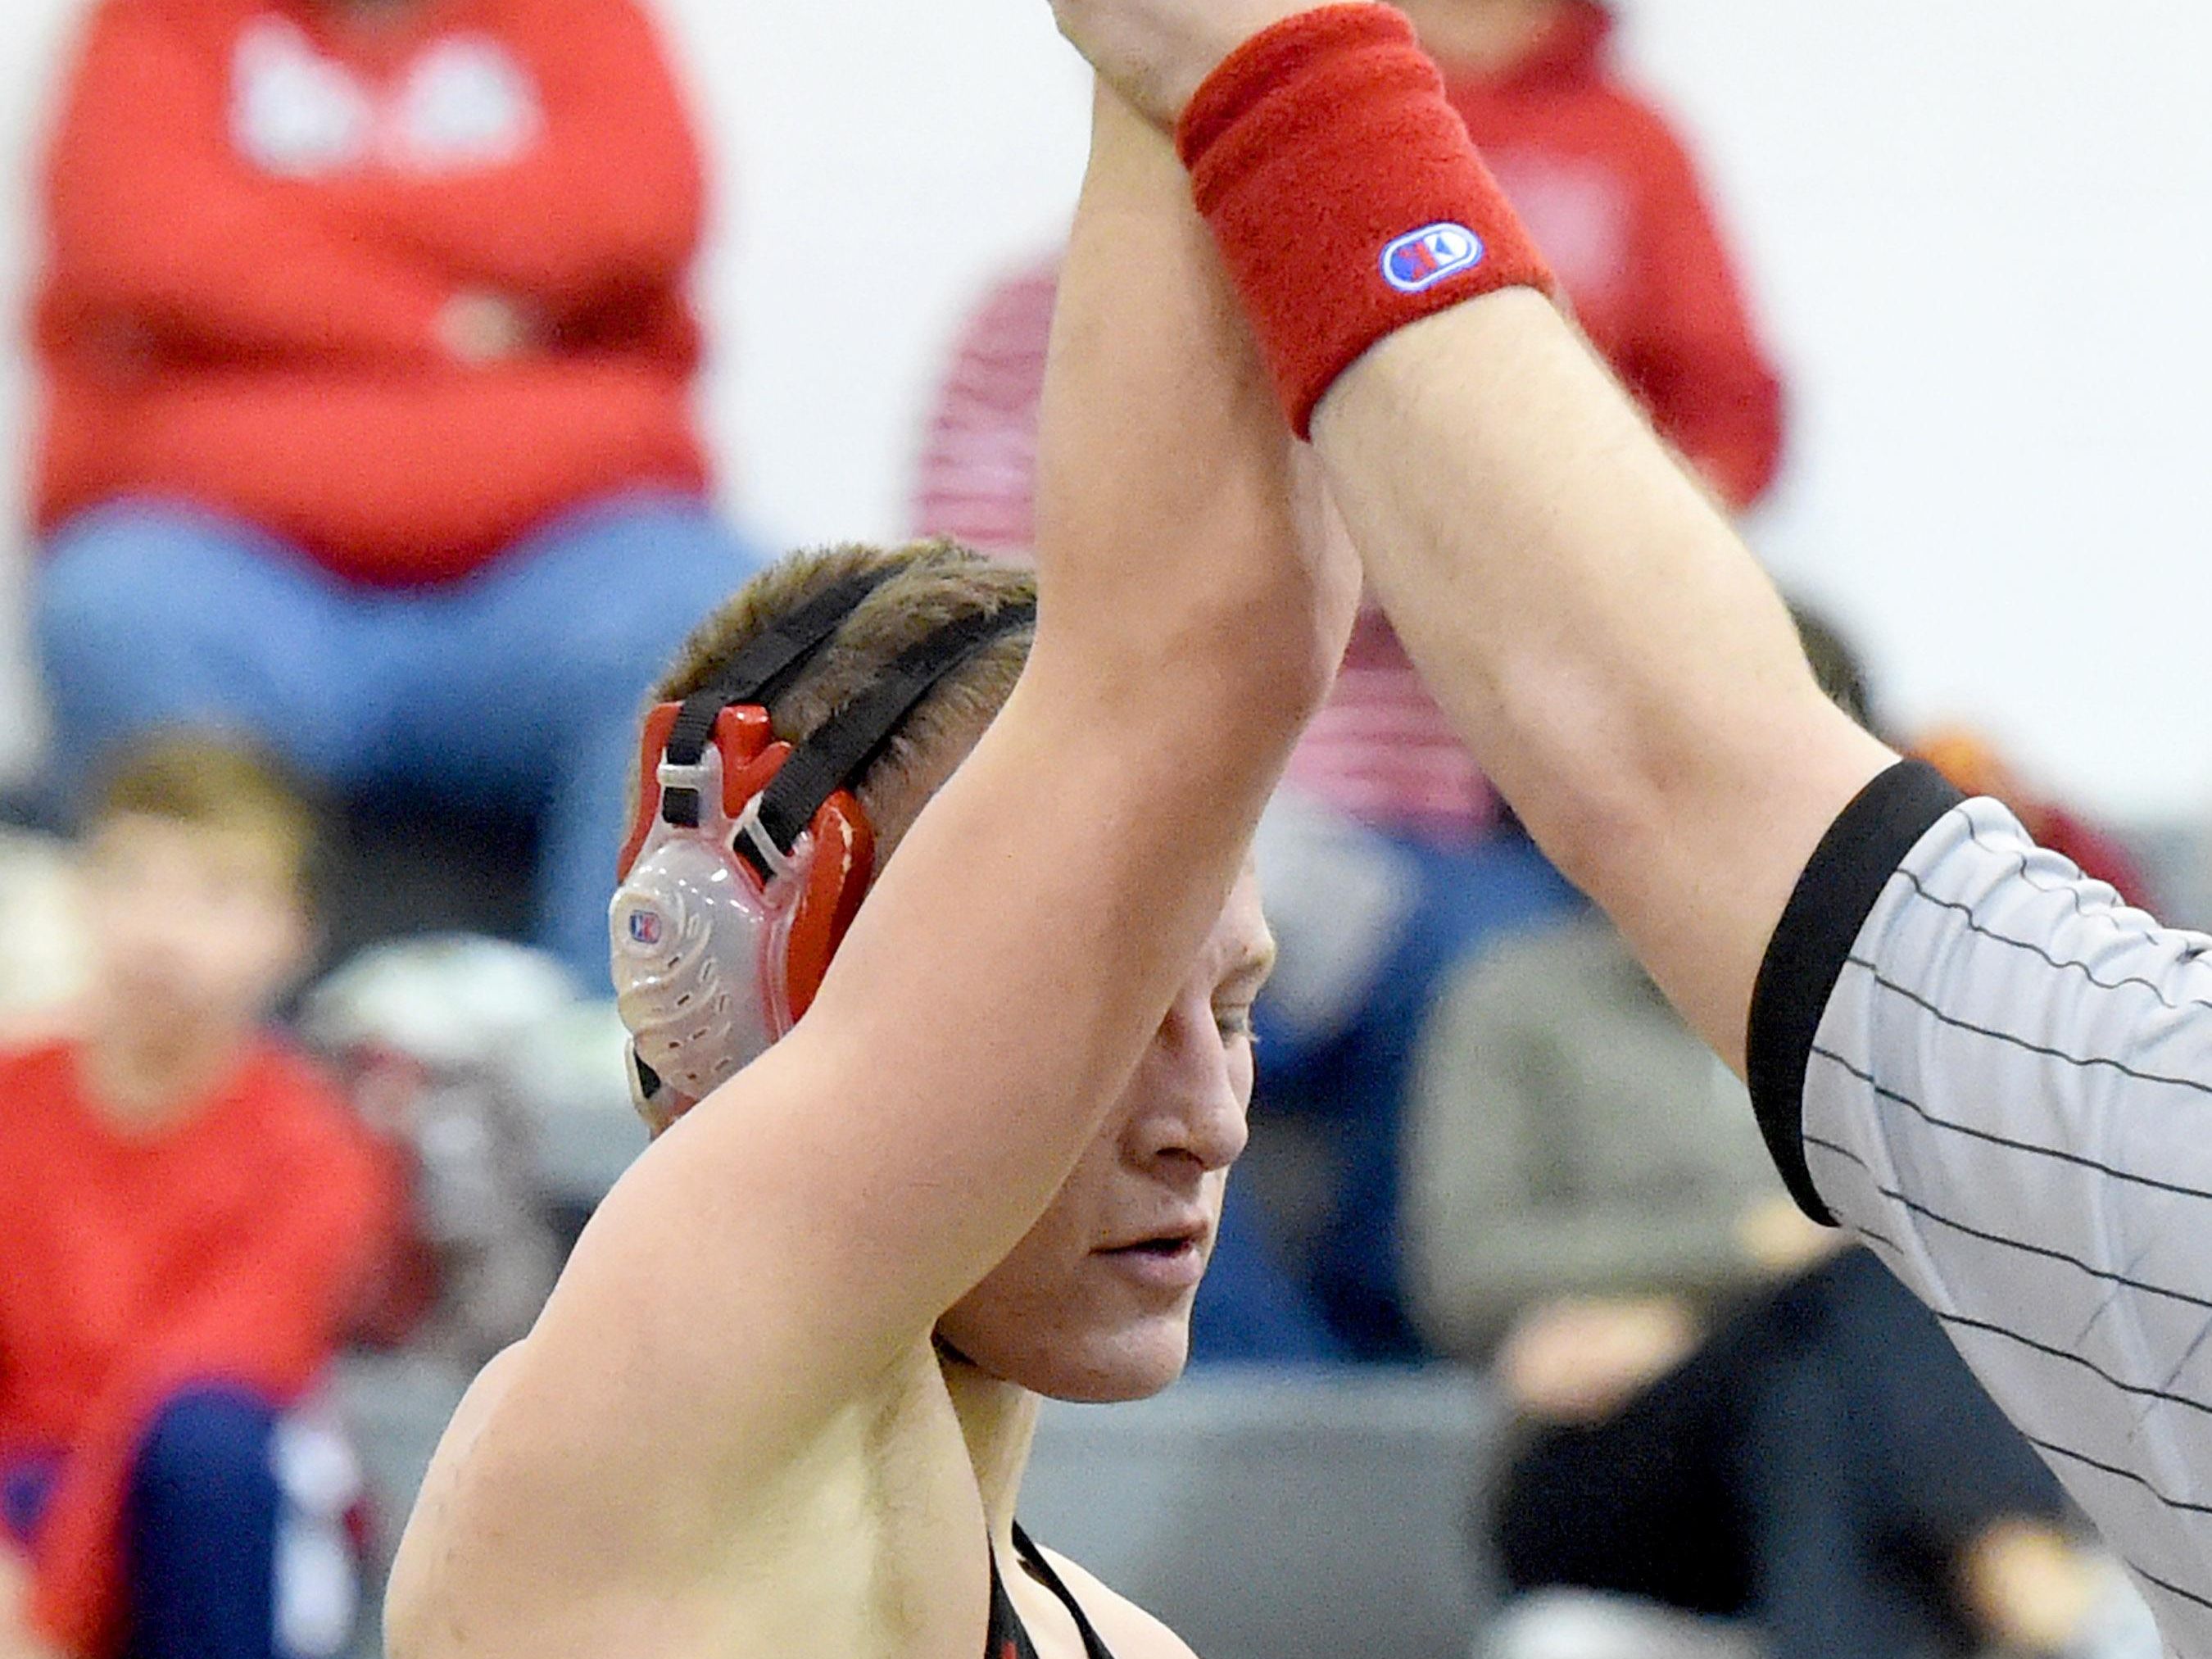 Riverheads’ Garret Shultz has his armed raised after he wins his 145-pound match against Buffalo Gap’s Josh Stagner during the Bison Wrestling Quad in Swoope on Wednesday.